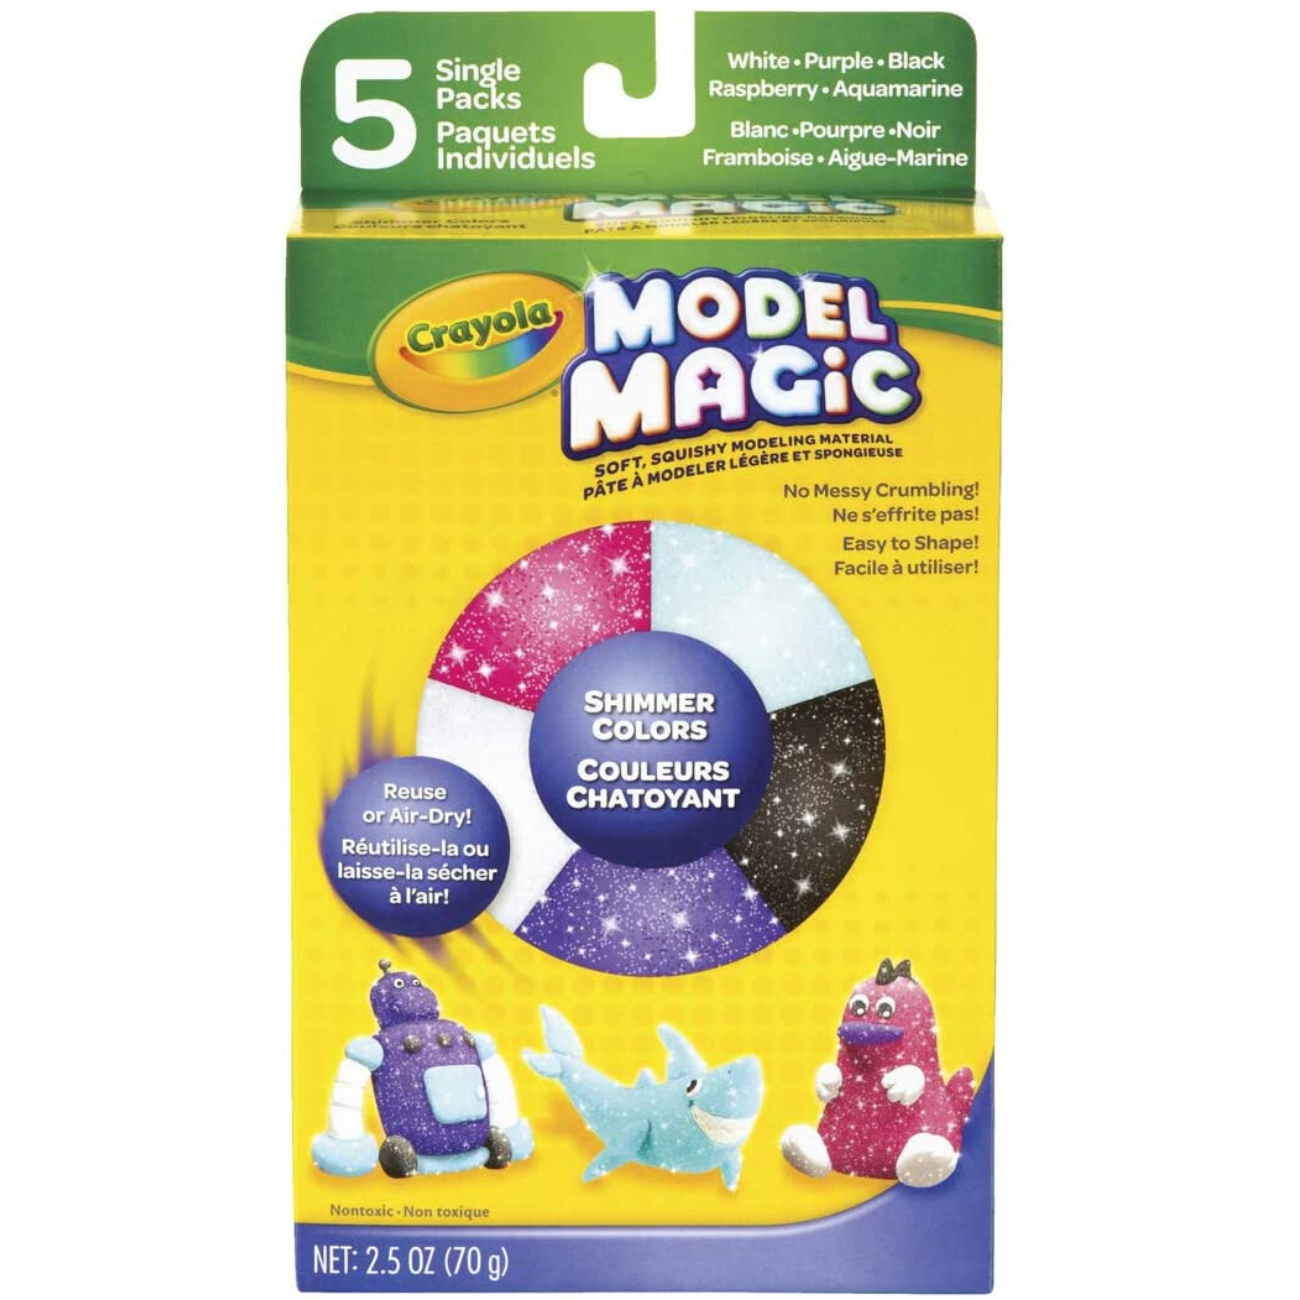 Save on Crayola, Modeling Clay